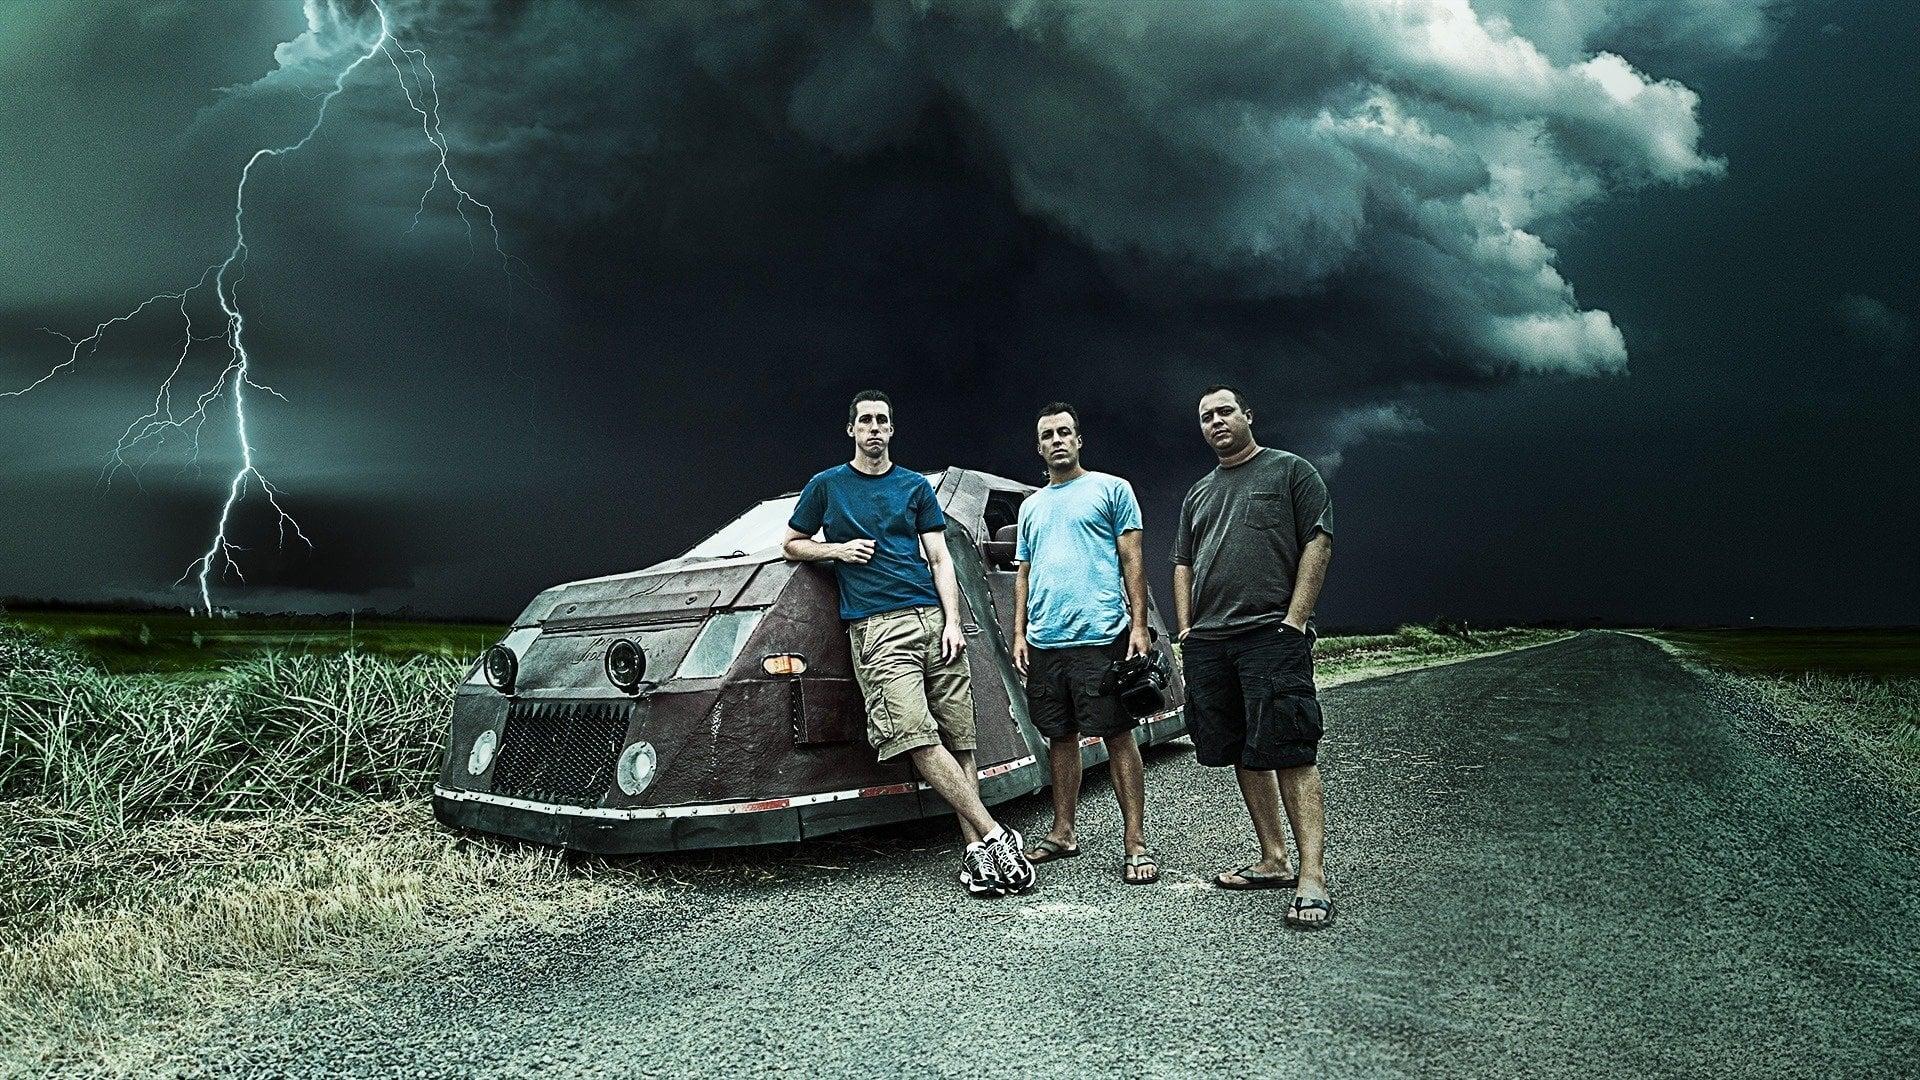 Storm Chasers backdrop